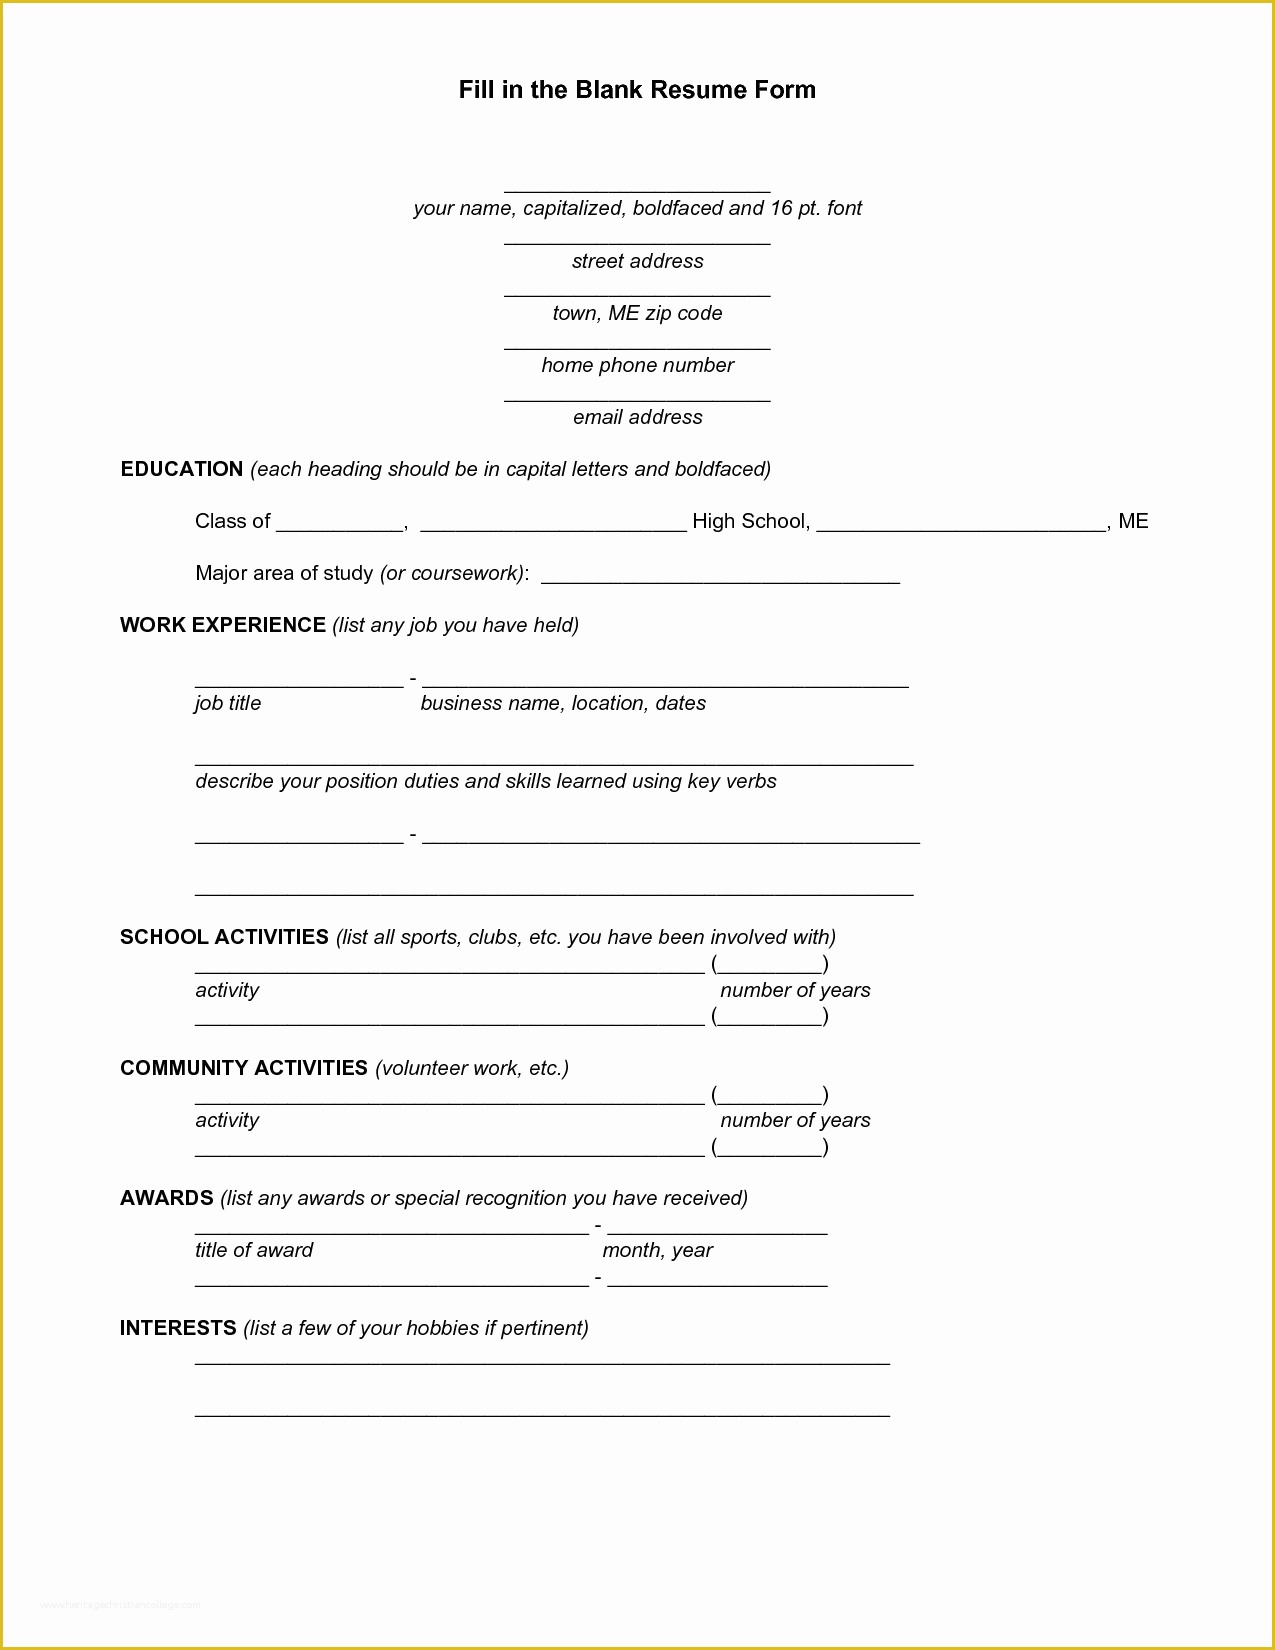 Free Printable Fill In the Blank Resume Templates Of Free Printable Fill In the Blank Resume Templates